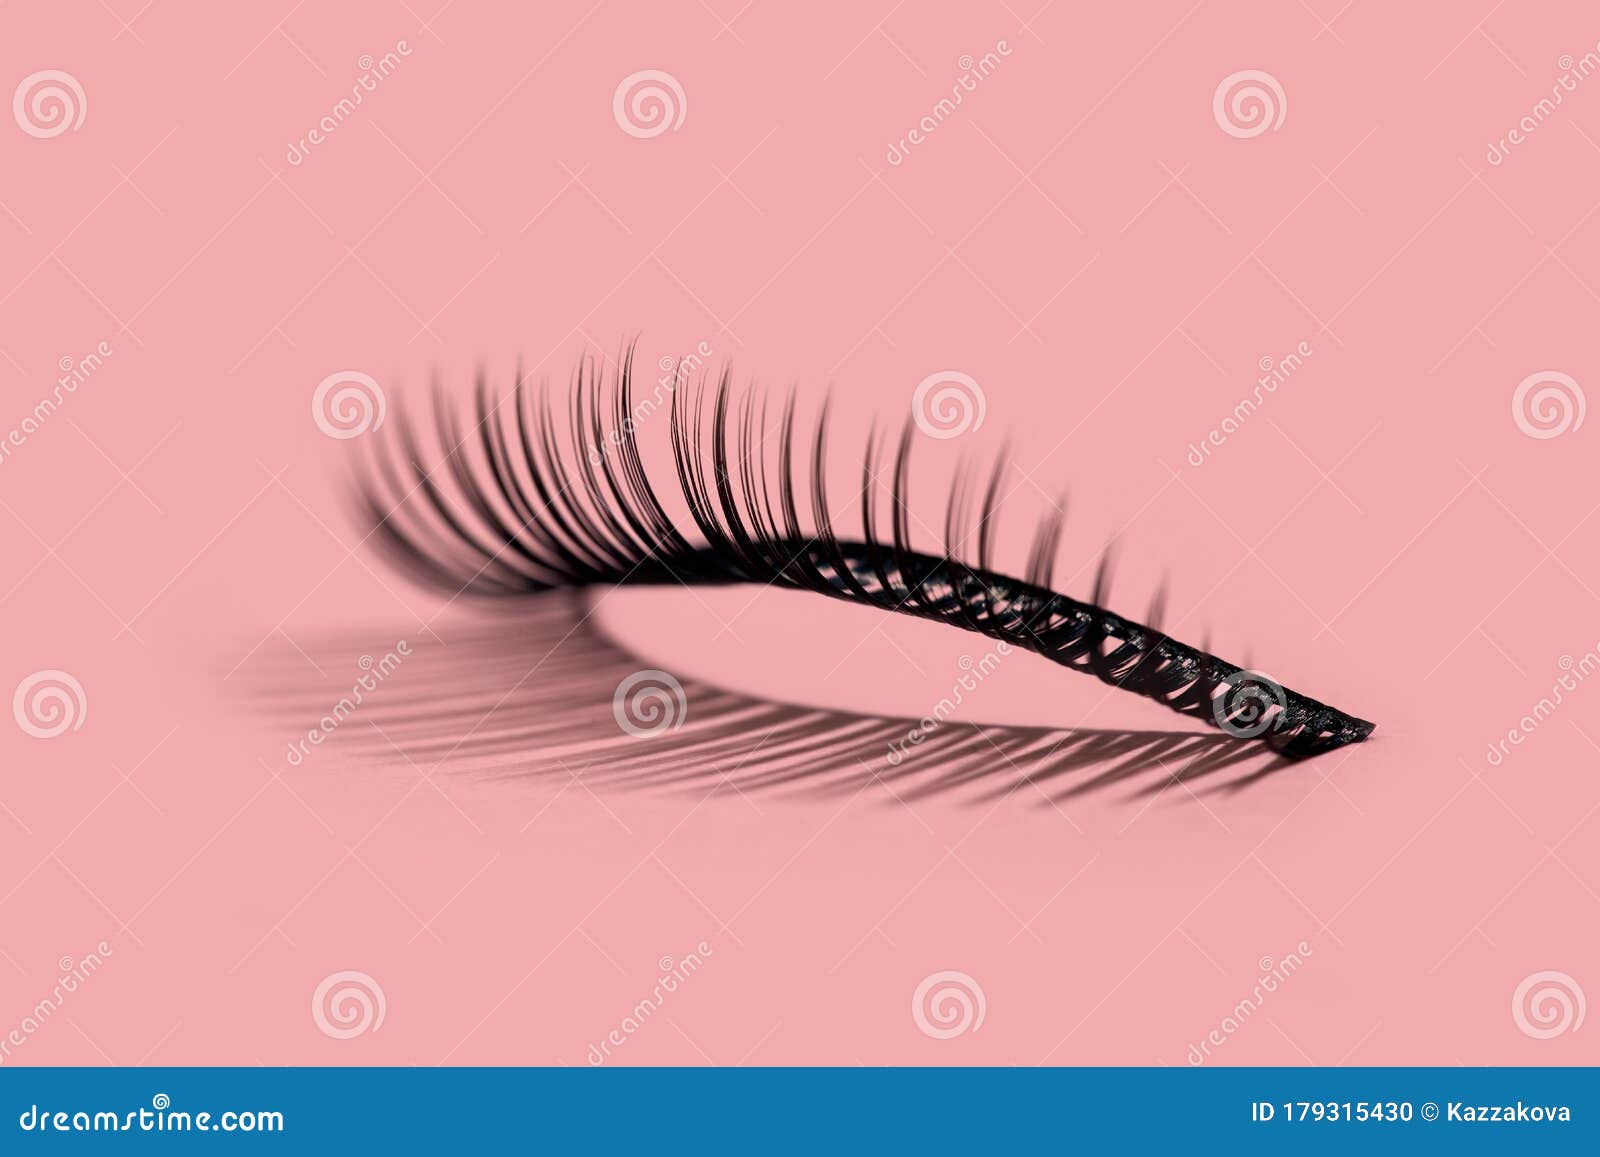 a pattern of false lashes on pink